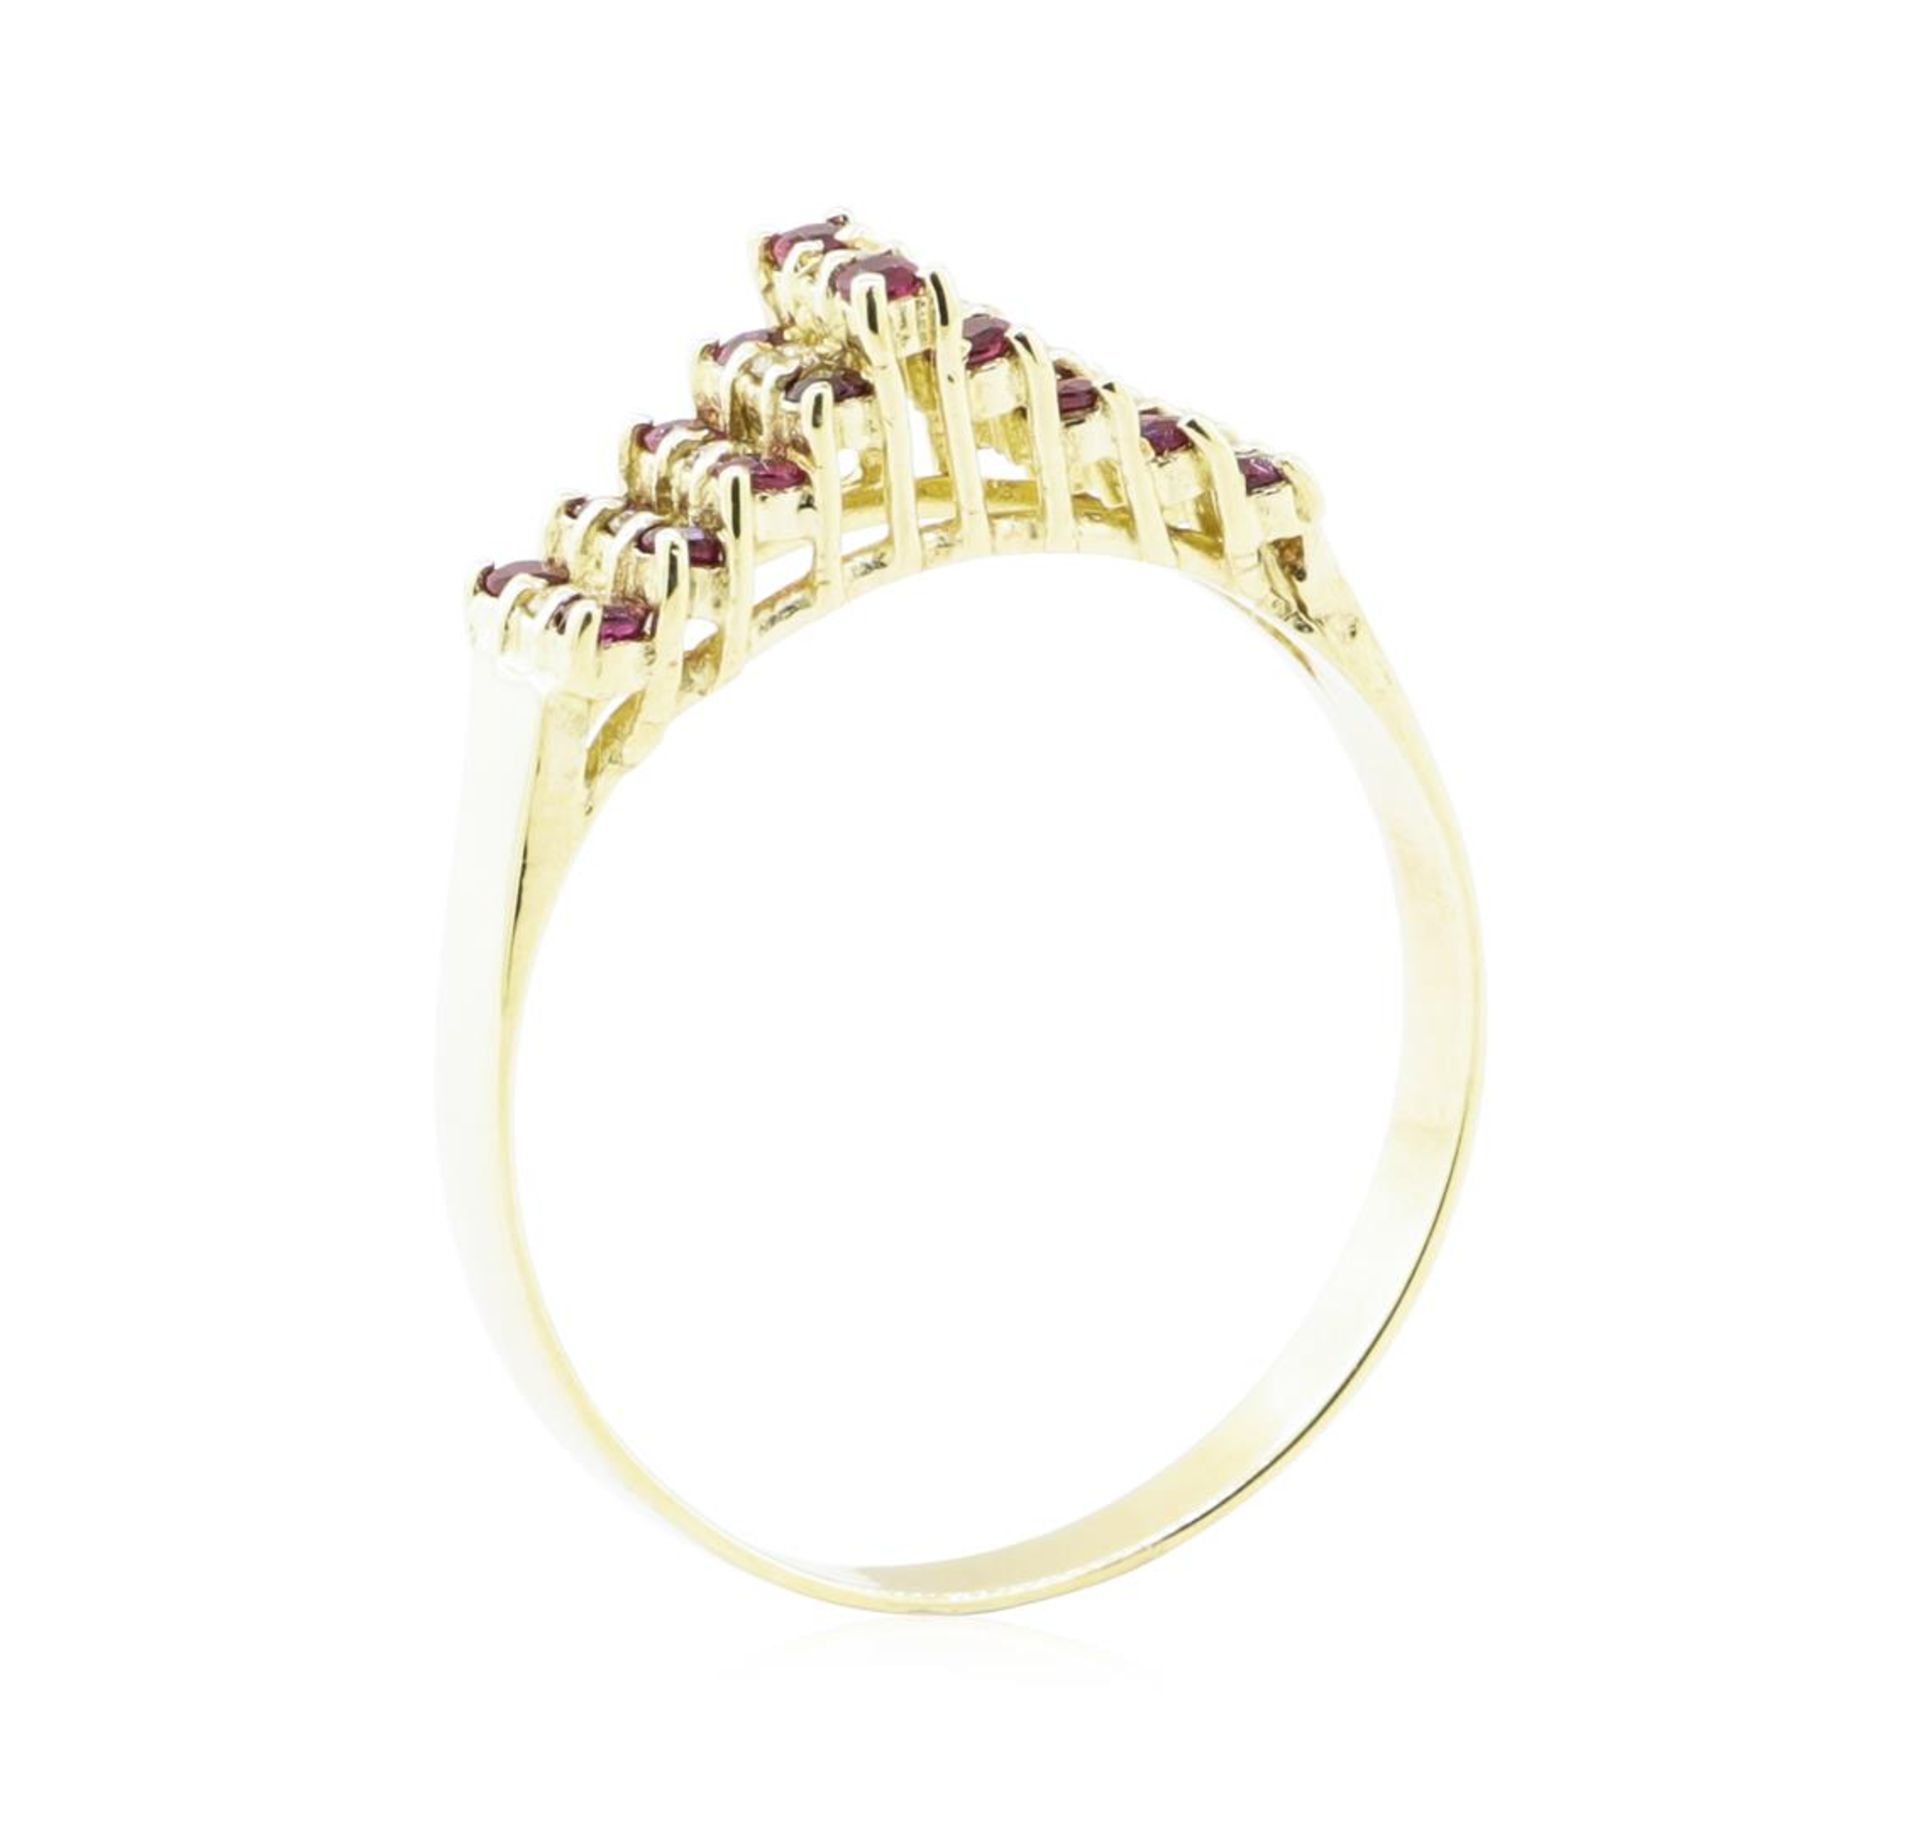 0.70 ctw Ruby and Diamond Ring - 14KT Yellow Gold - Image 4 of 4